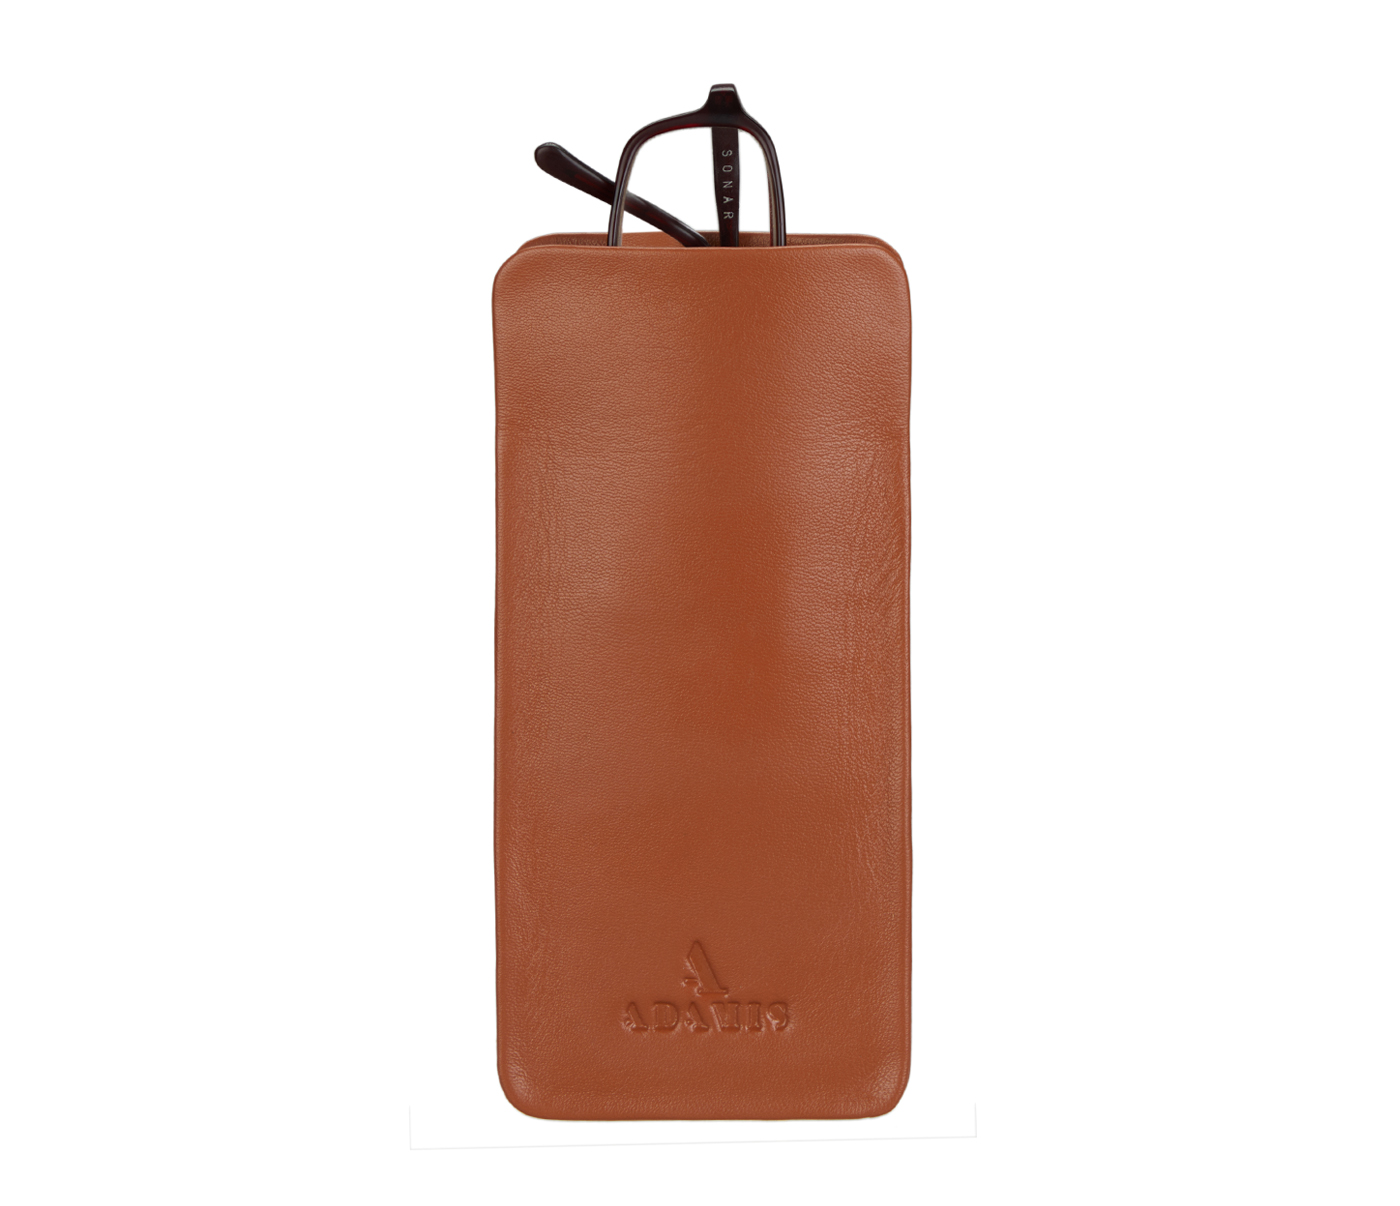 Spectacle Case--Soft stitch free spectacle case in Genuine Leather - Tan